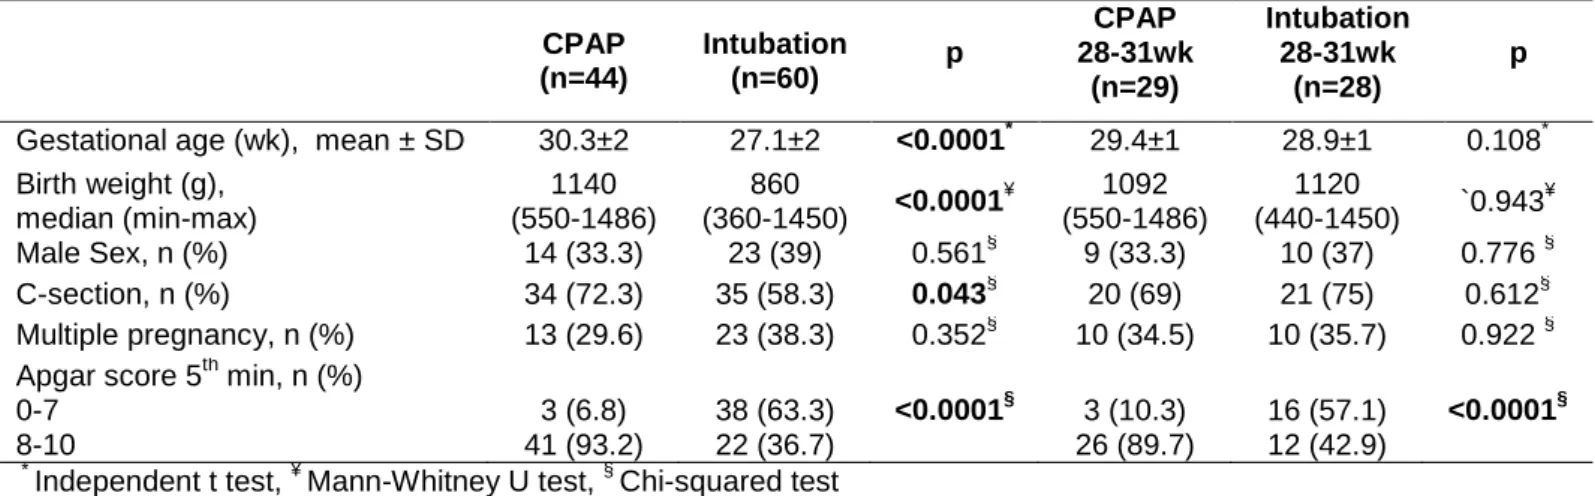 Table 1. Demographic and clinical characteristics CPAP  (n=44)  Intubation (n=60)  p  CPAP   28-31wk  (n=29)  Intubation 28-31wk (n=28)  p 